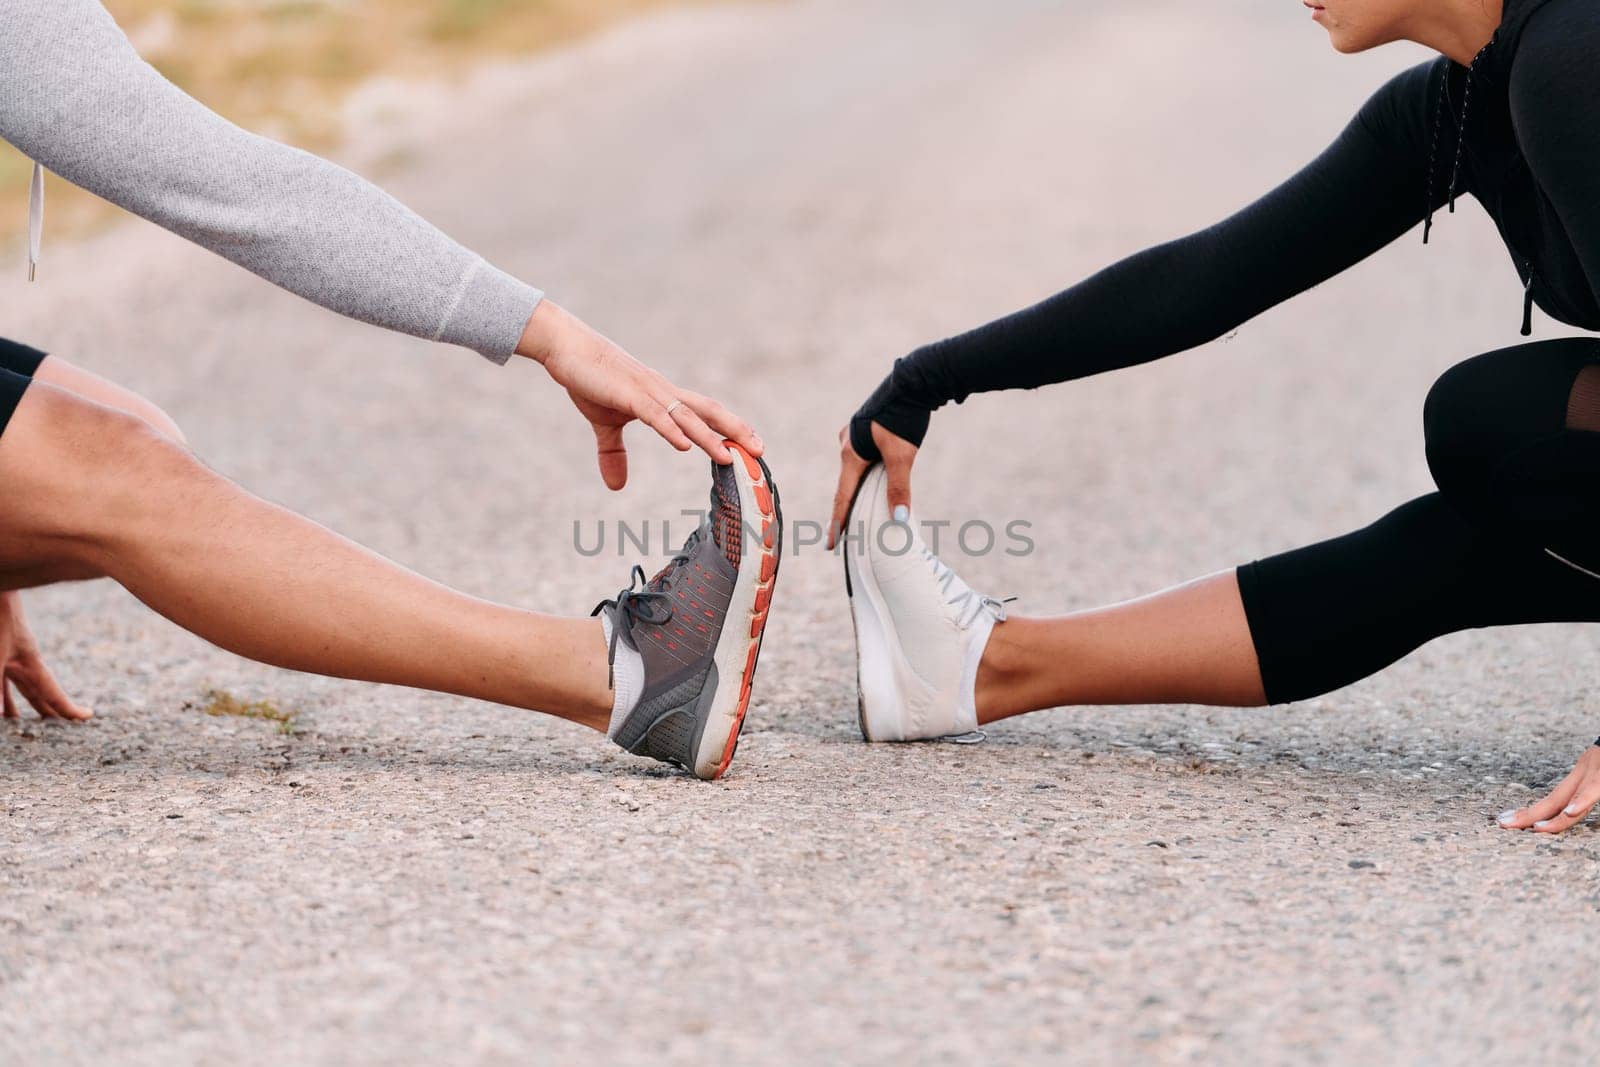 A romantic couple stretches after a tiring morning run